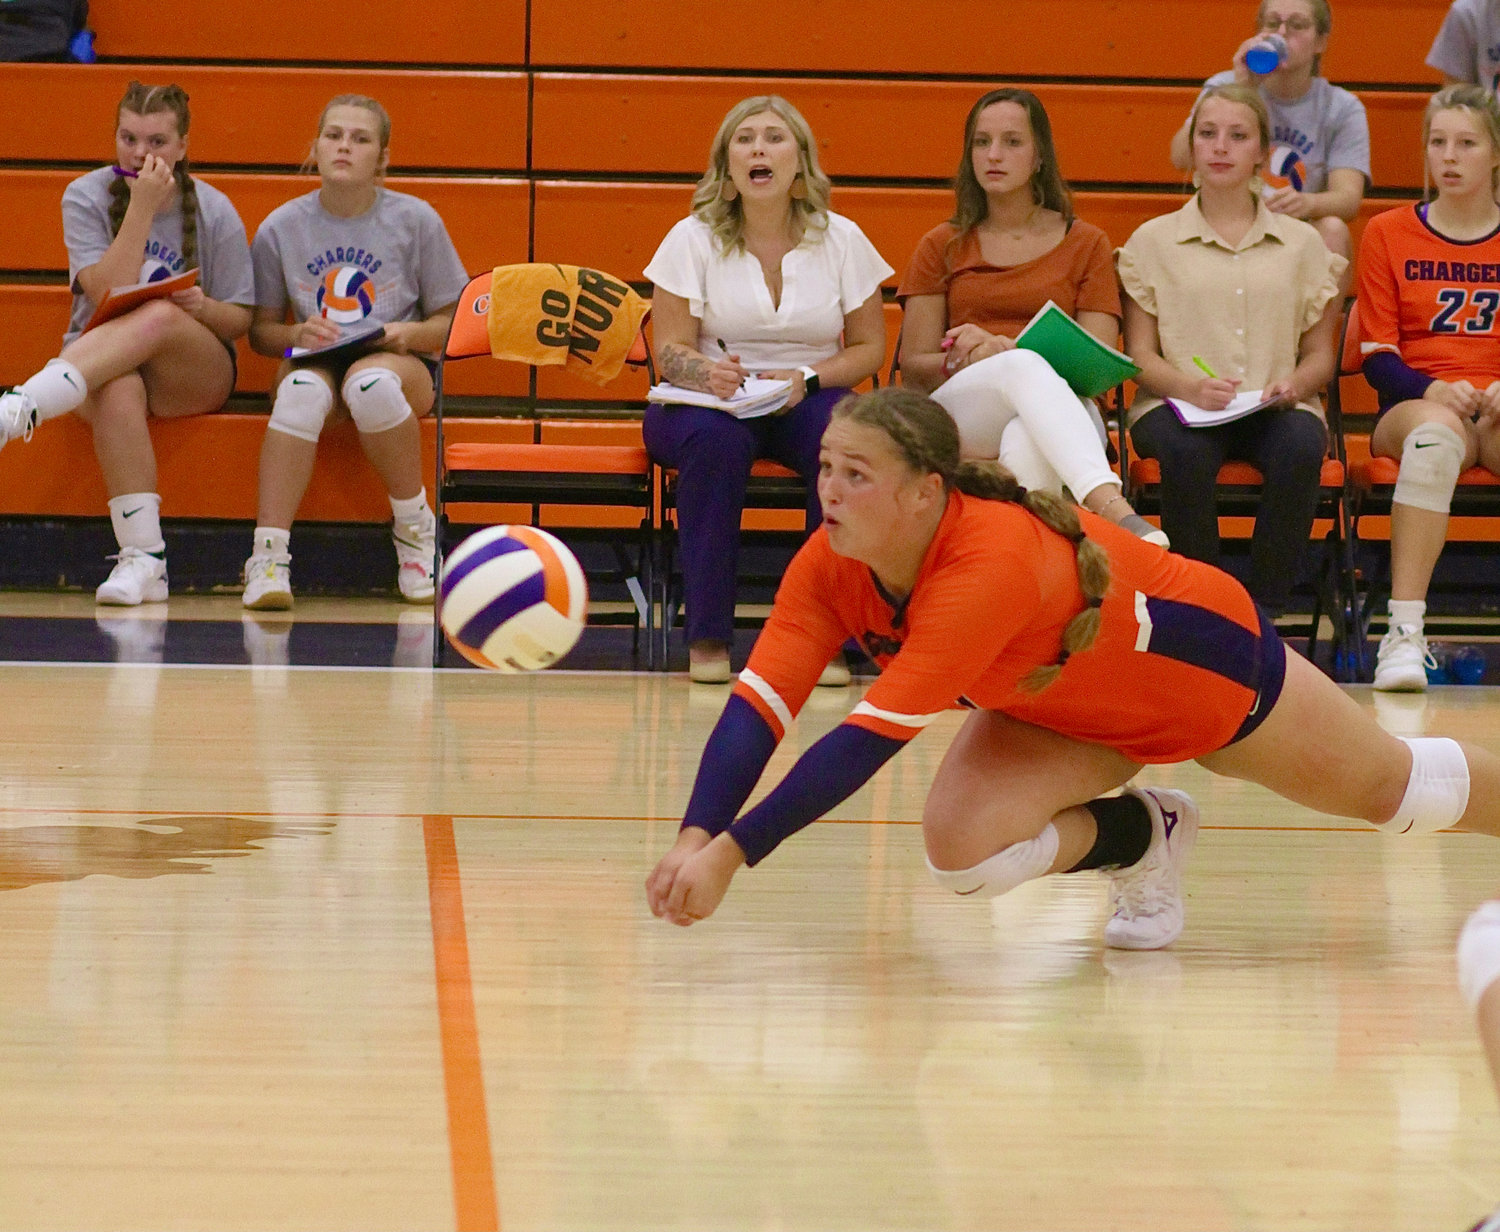 Sophomore Piper Ramey lays out for a ball during the Chargers match against Frankfort on Tuesday.